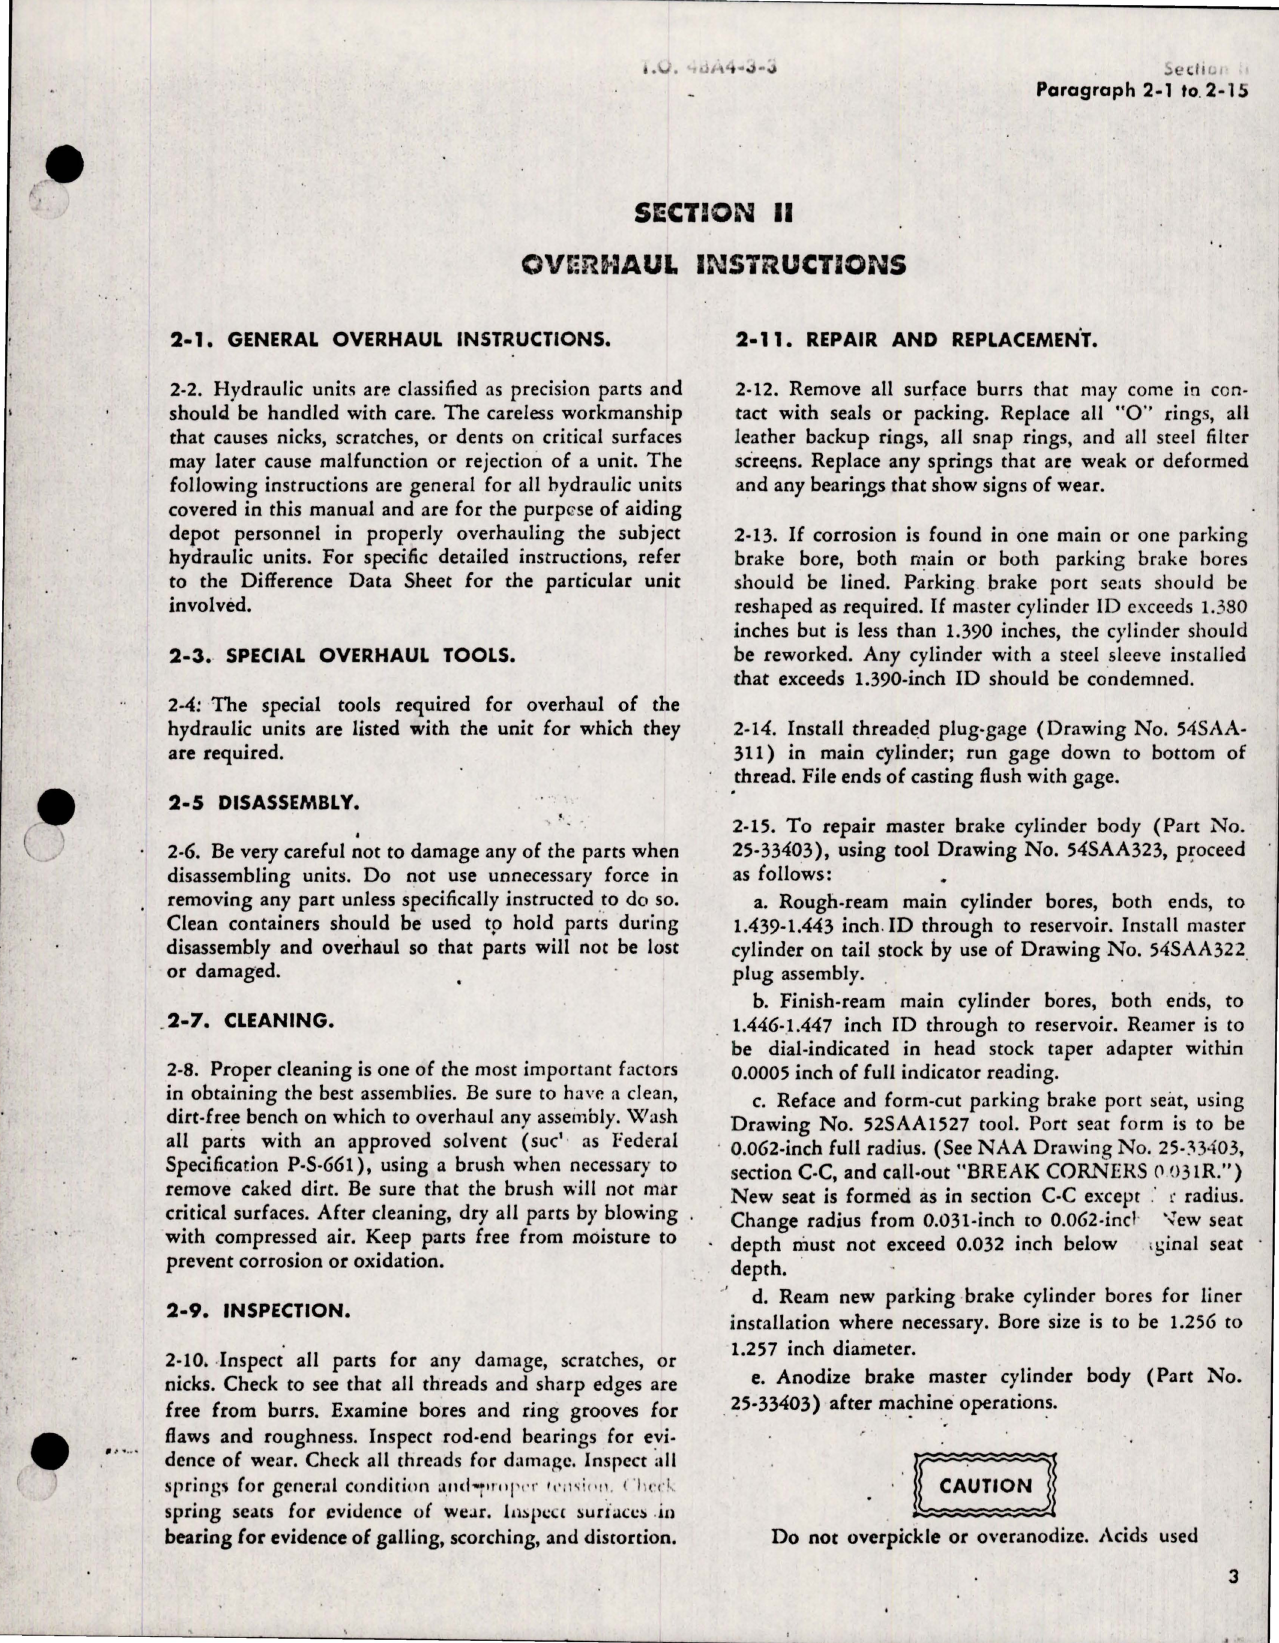 Sample page 7 from AirCorps Library document: Overhaul Instructions for Hydraulic Landing Gear Units 